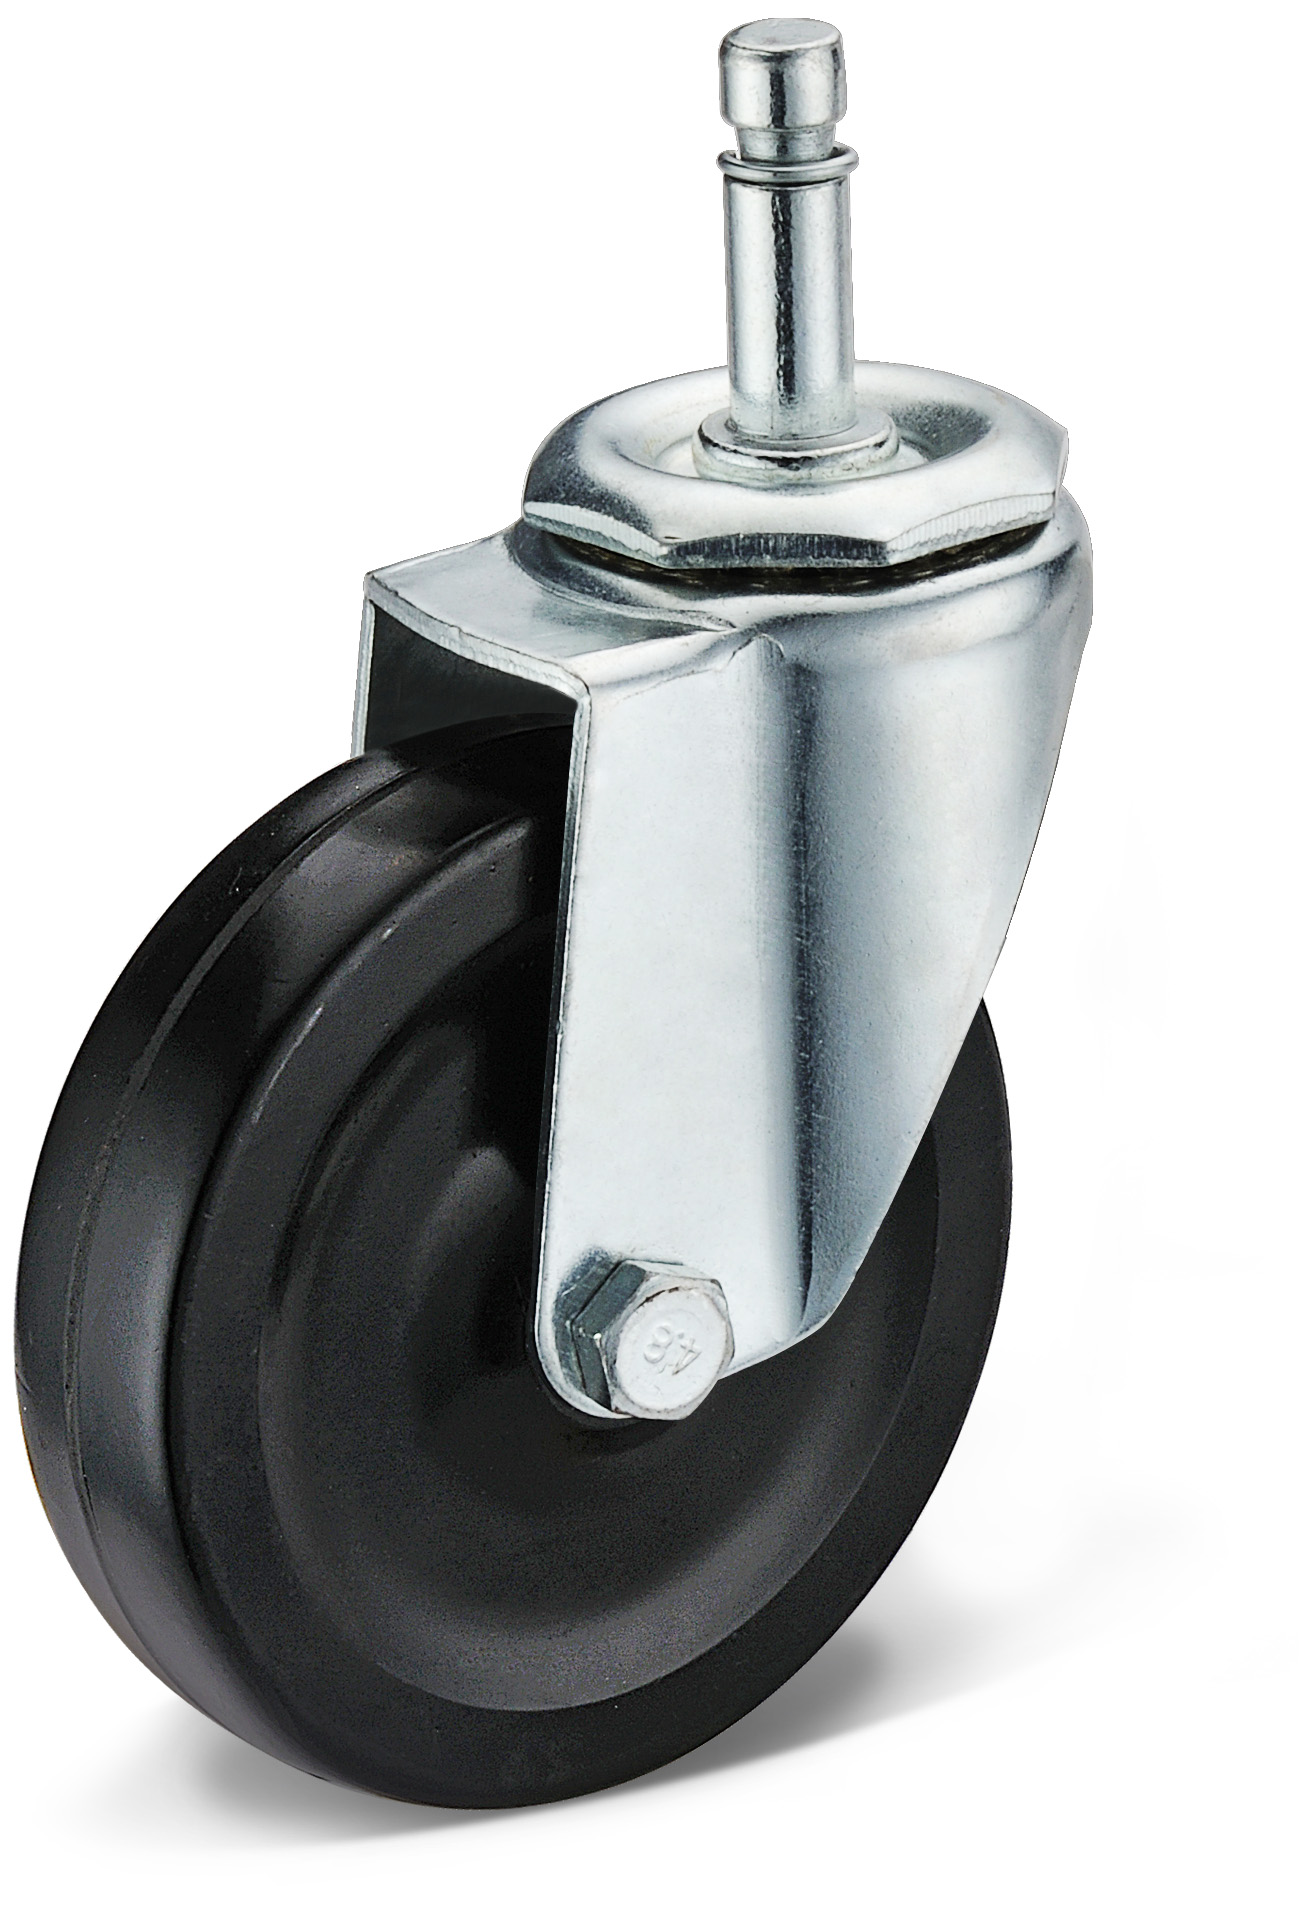 Self-locking Plunger-type Movable Casters